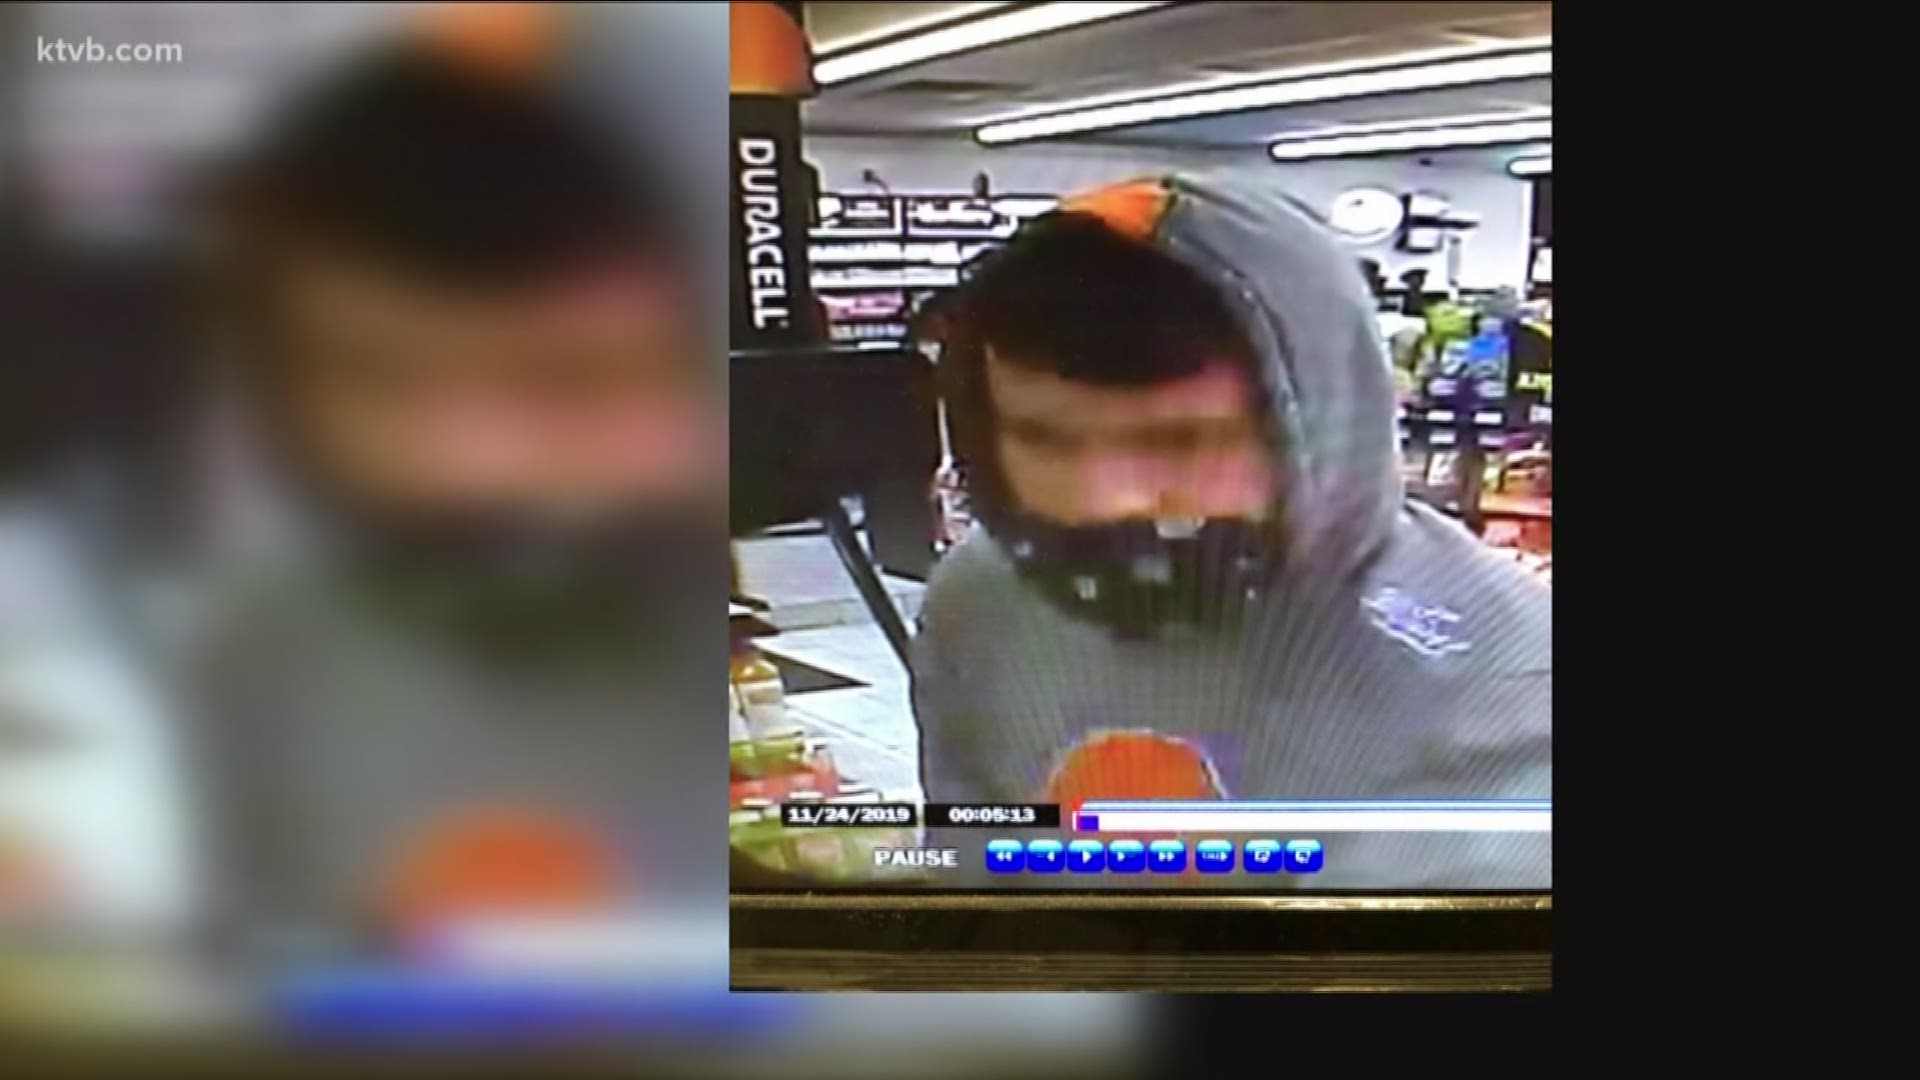 Police are searching for a man who robbed a Nampa convenience store at gunpoint early Monday morning.